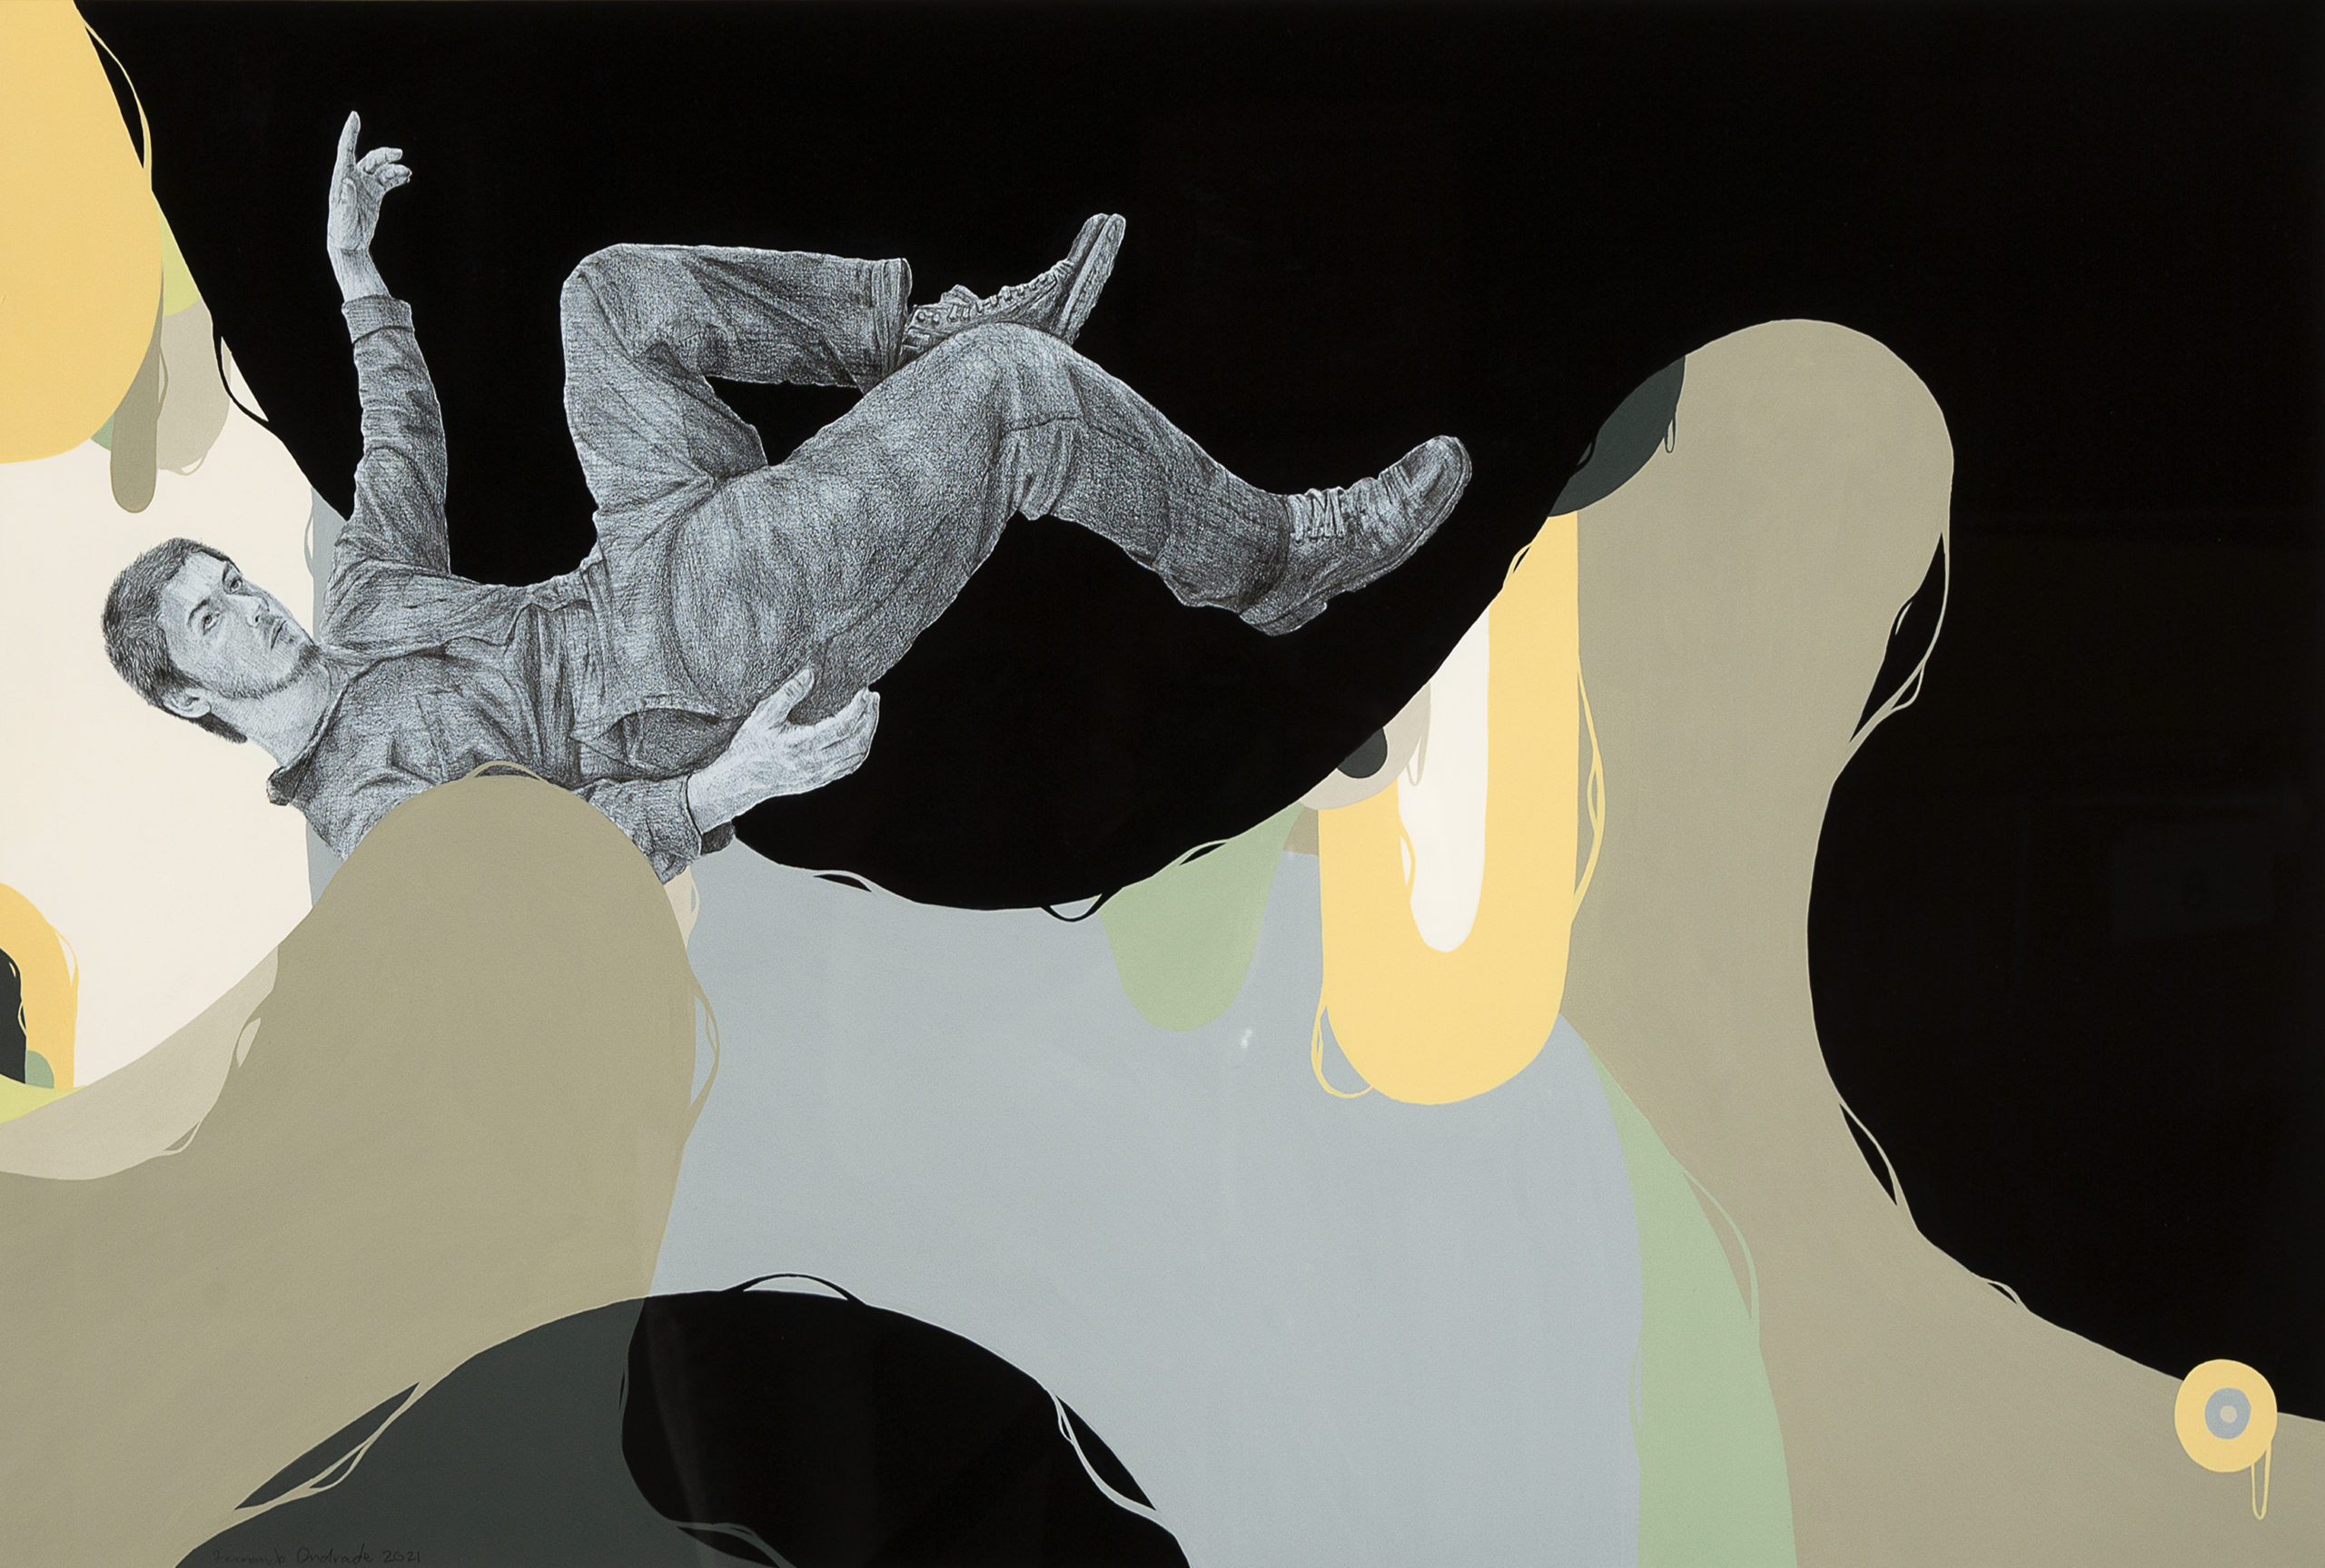 
		                					Fernando Andrade		                																	
																											<i>Isolation,</i>  
																																								2021, 
																																								acrylic and graphite on paper, 
																																								22 x 34 inches 
																								
		                				